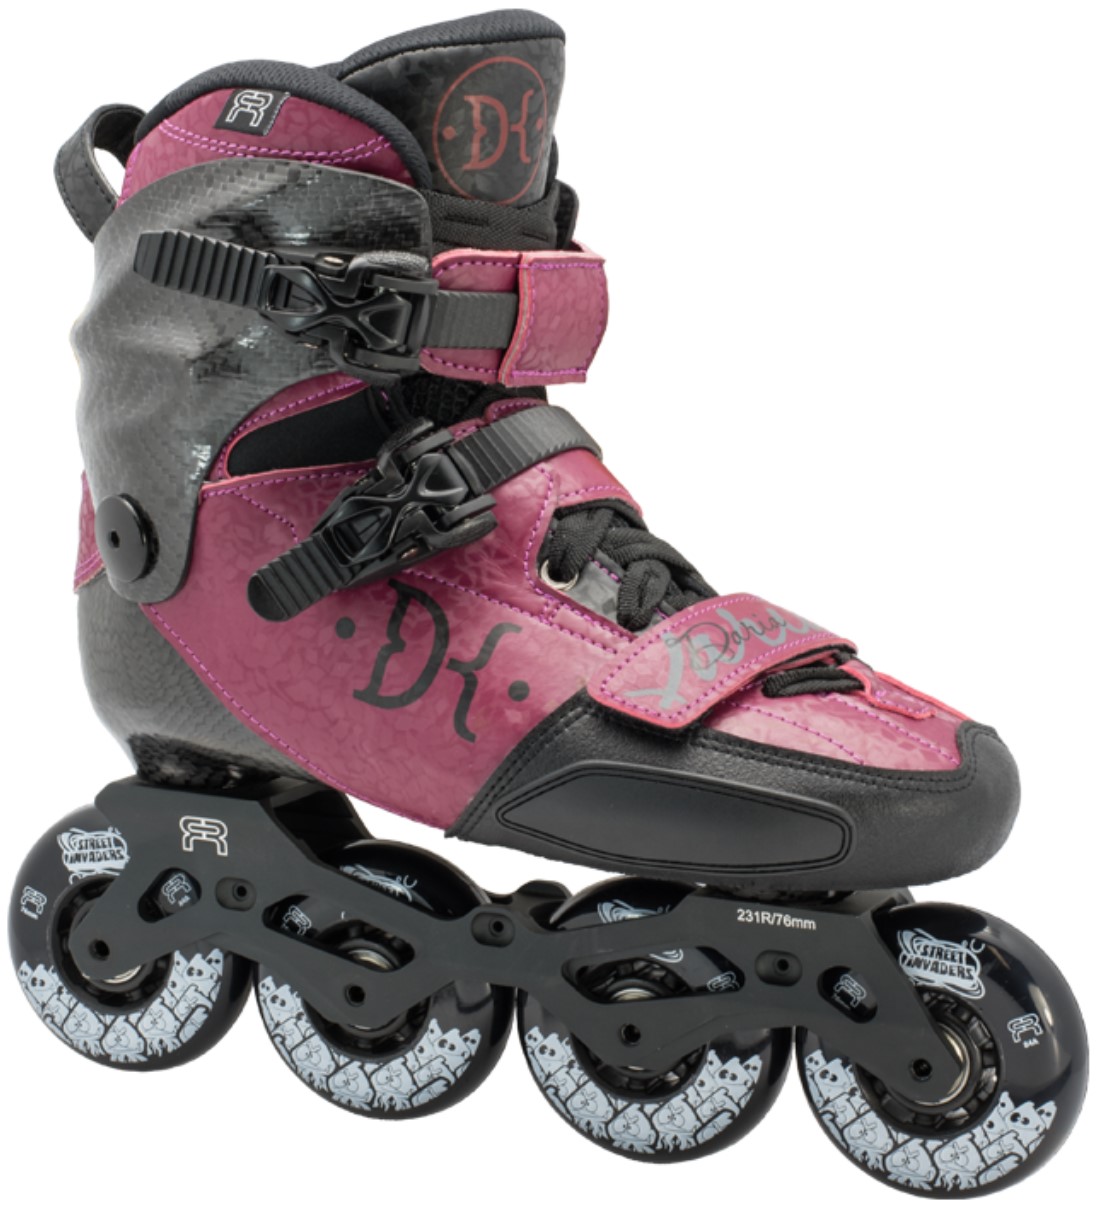 FR Daria freestyle slalom inline skate with four wheels and carbon boot in violet